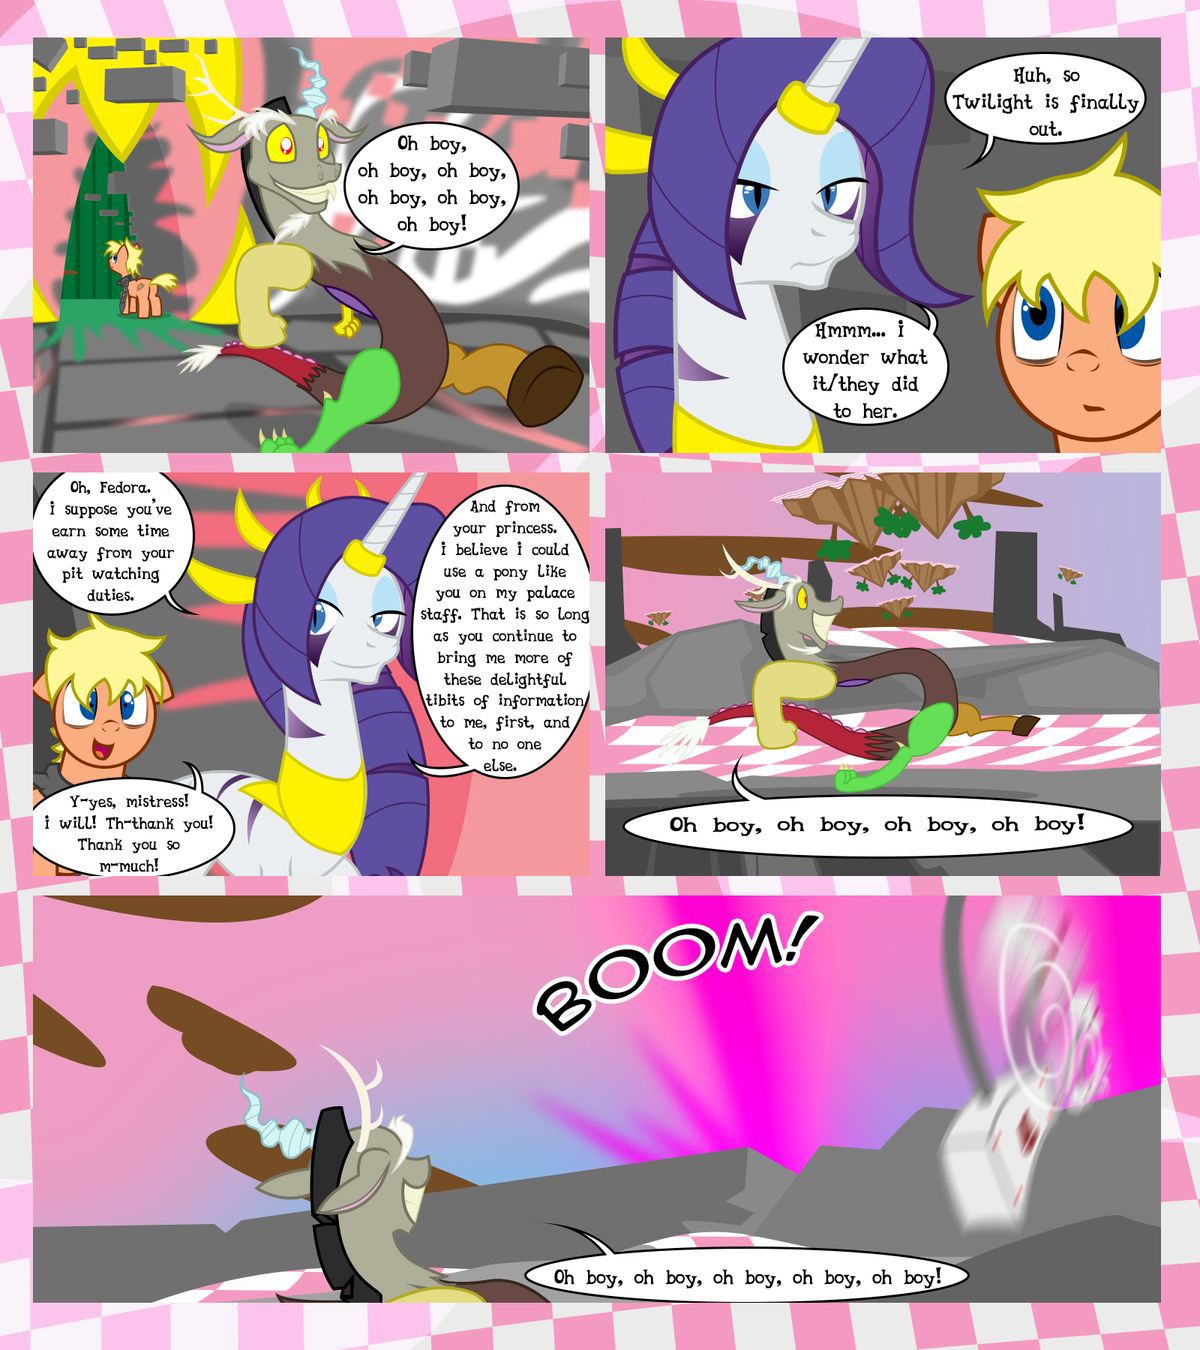 [GatesMcCloud] Cutie Mark Crusaders 10k: Chapter 3 - The Lost (My Little Pony: Friendship is Magic) [English] [Ongoing] 14